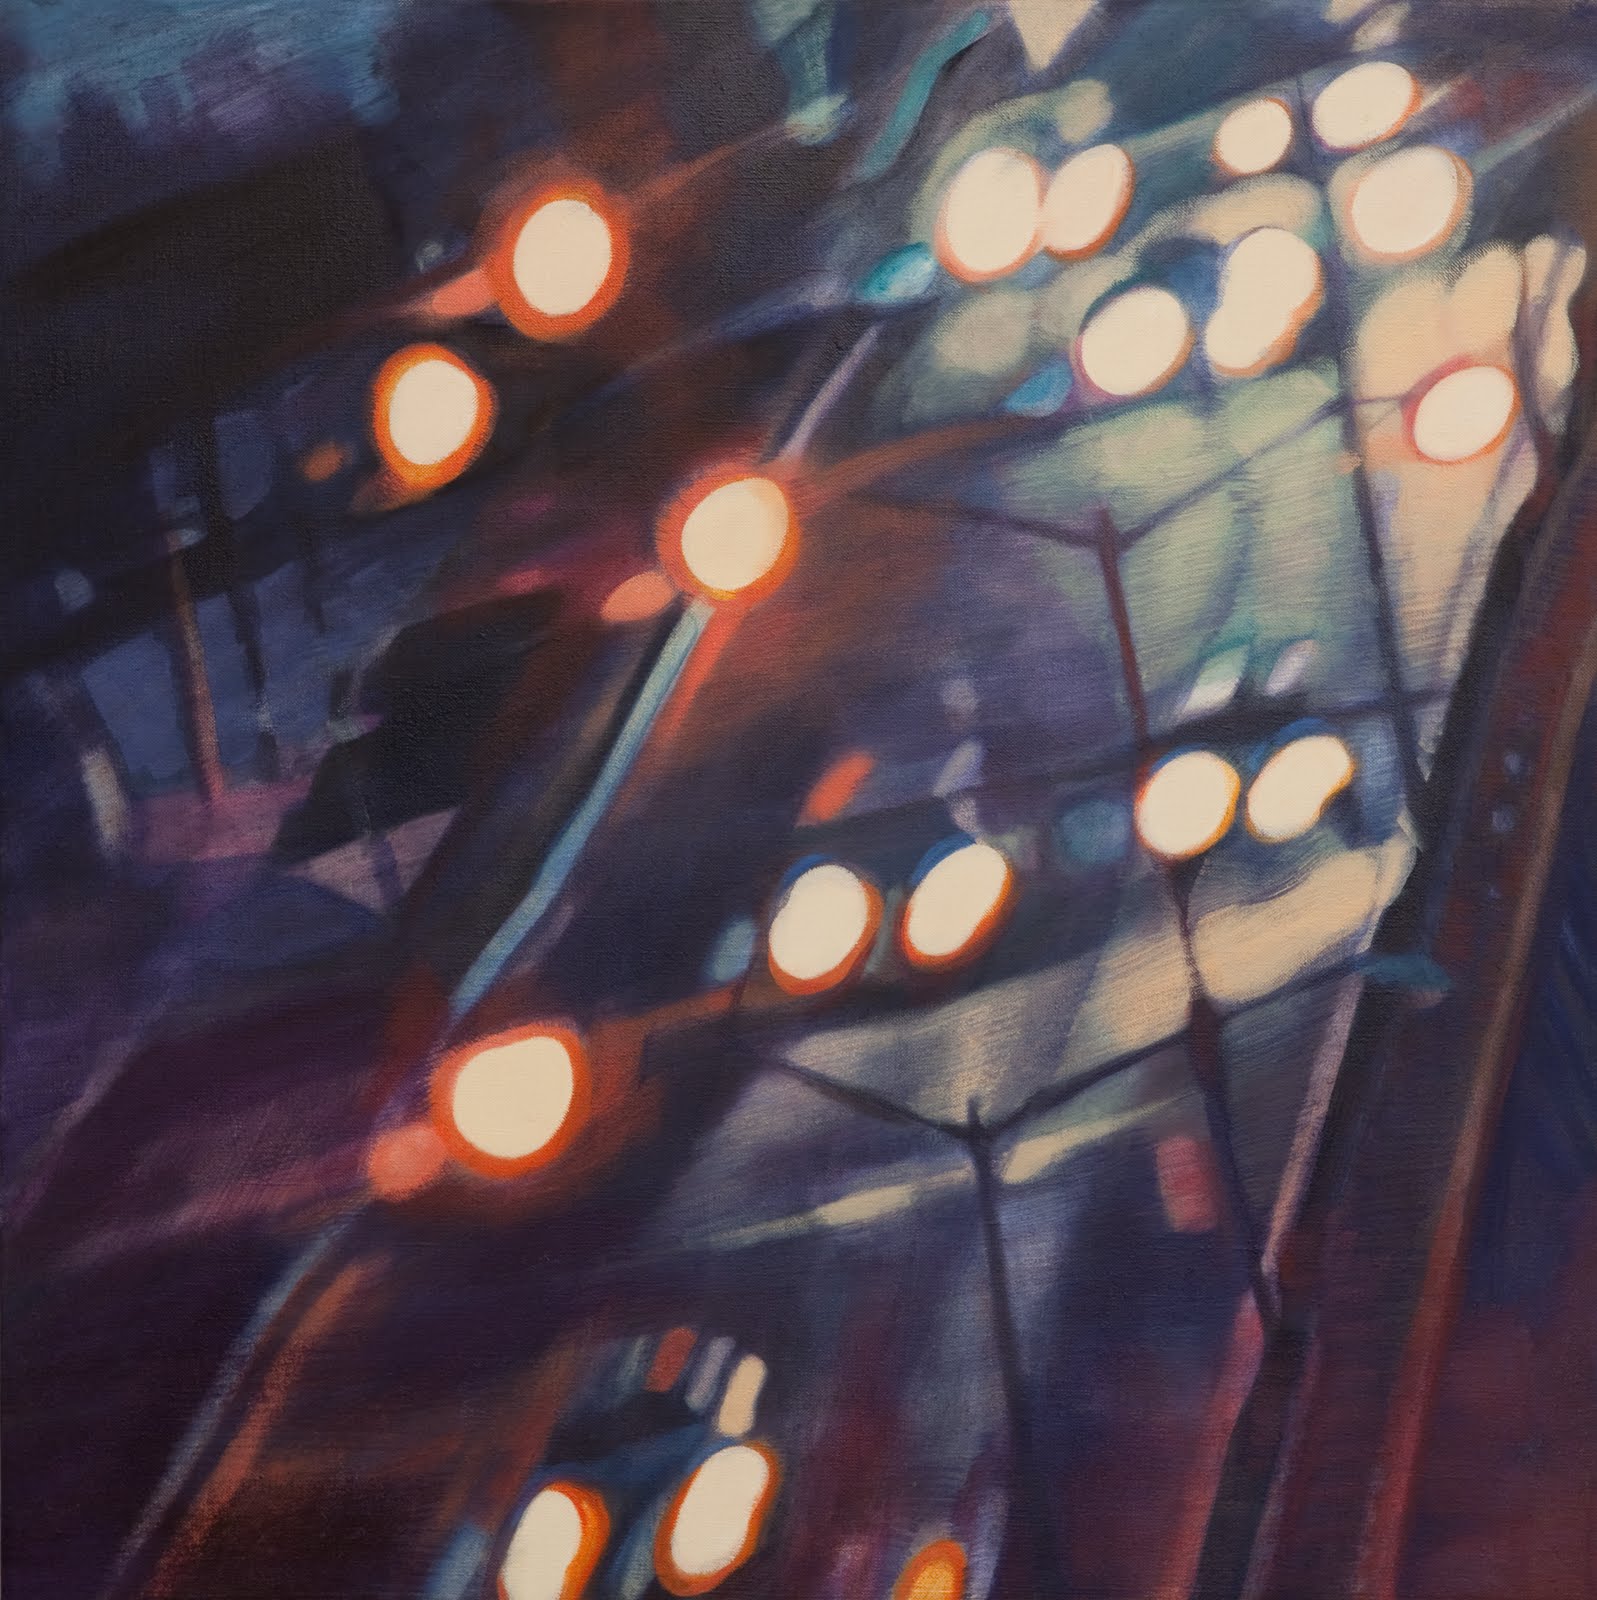 "Transition (Traffic)",oil on linen, 22 x 22 x 2.5 in.